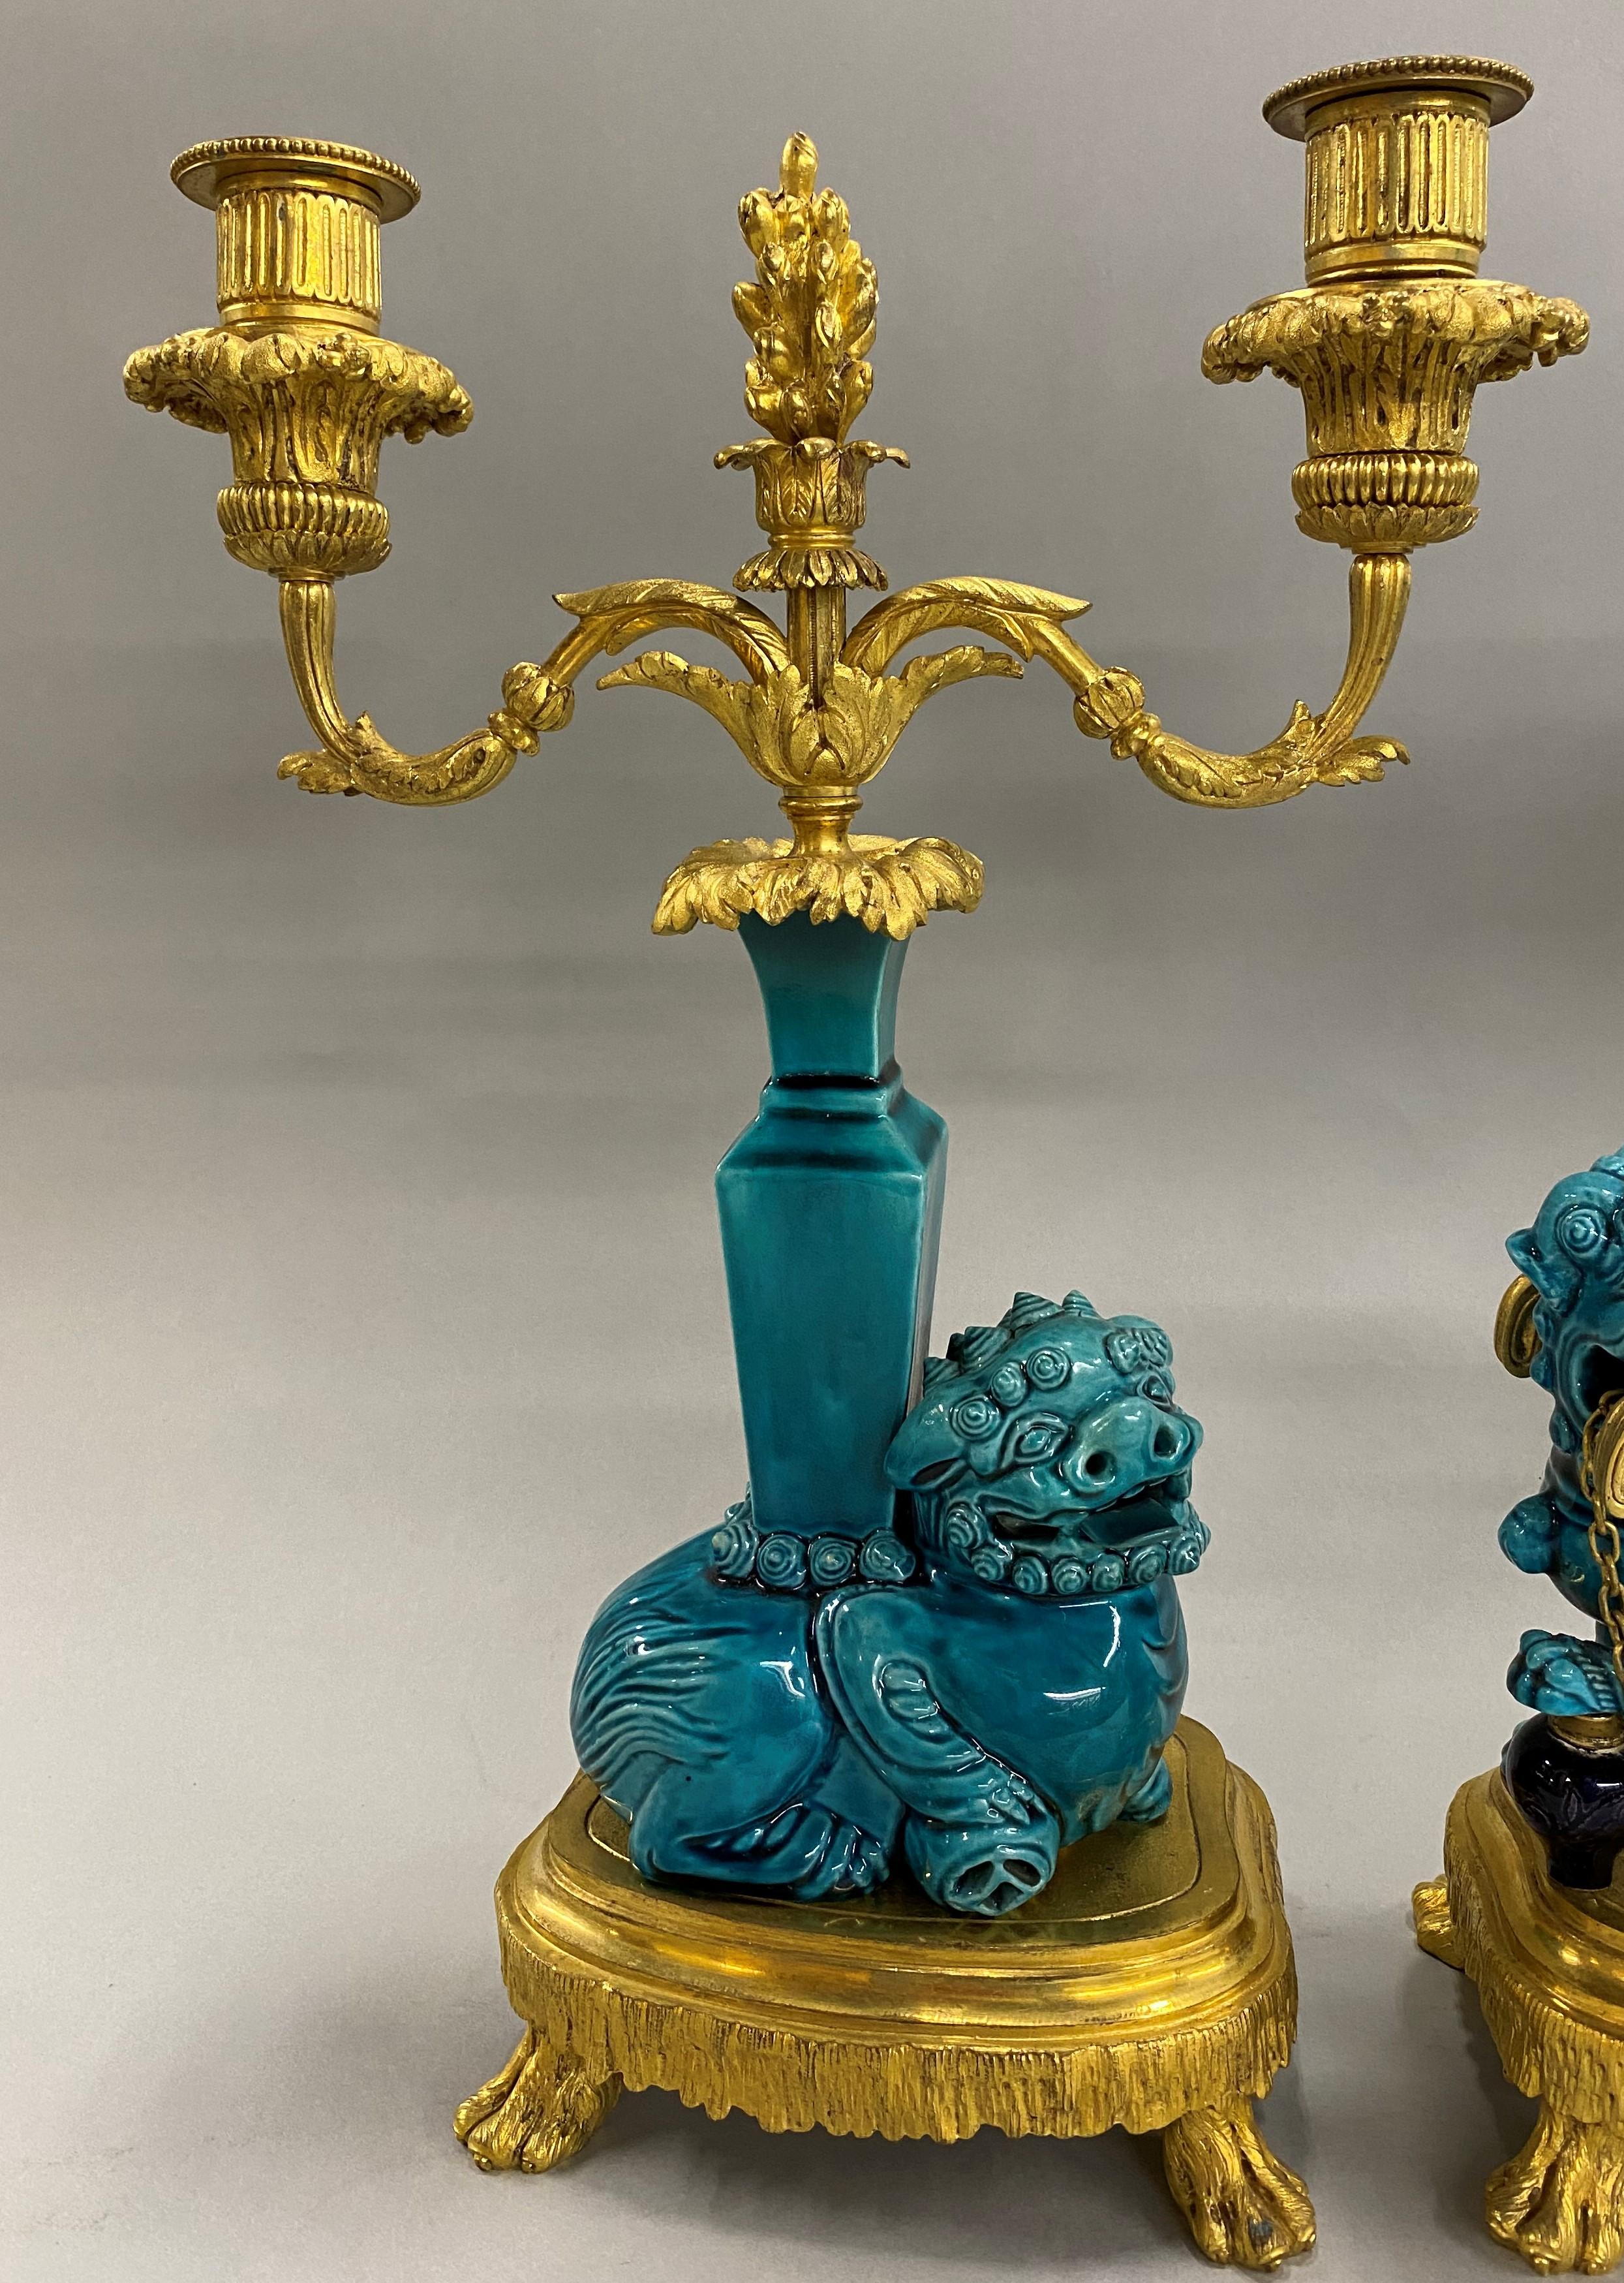 A beautiful ormolu French three-piece porcelain clock set in the Chinese taste with a turquoise glaze, with a pair of two light candelabra flanking a central urn with clock, each featuring foo dog decoration. The set dates to the 19th century in